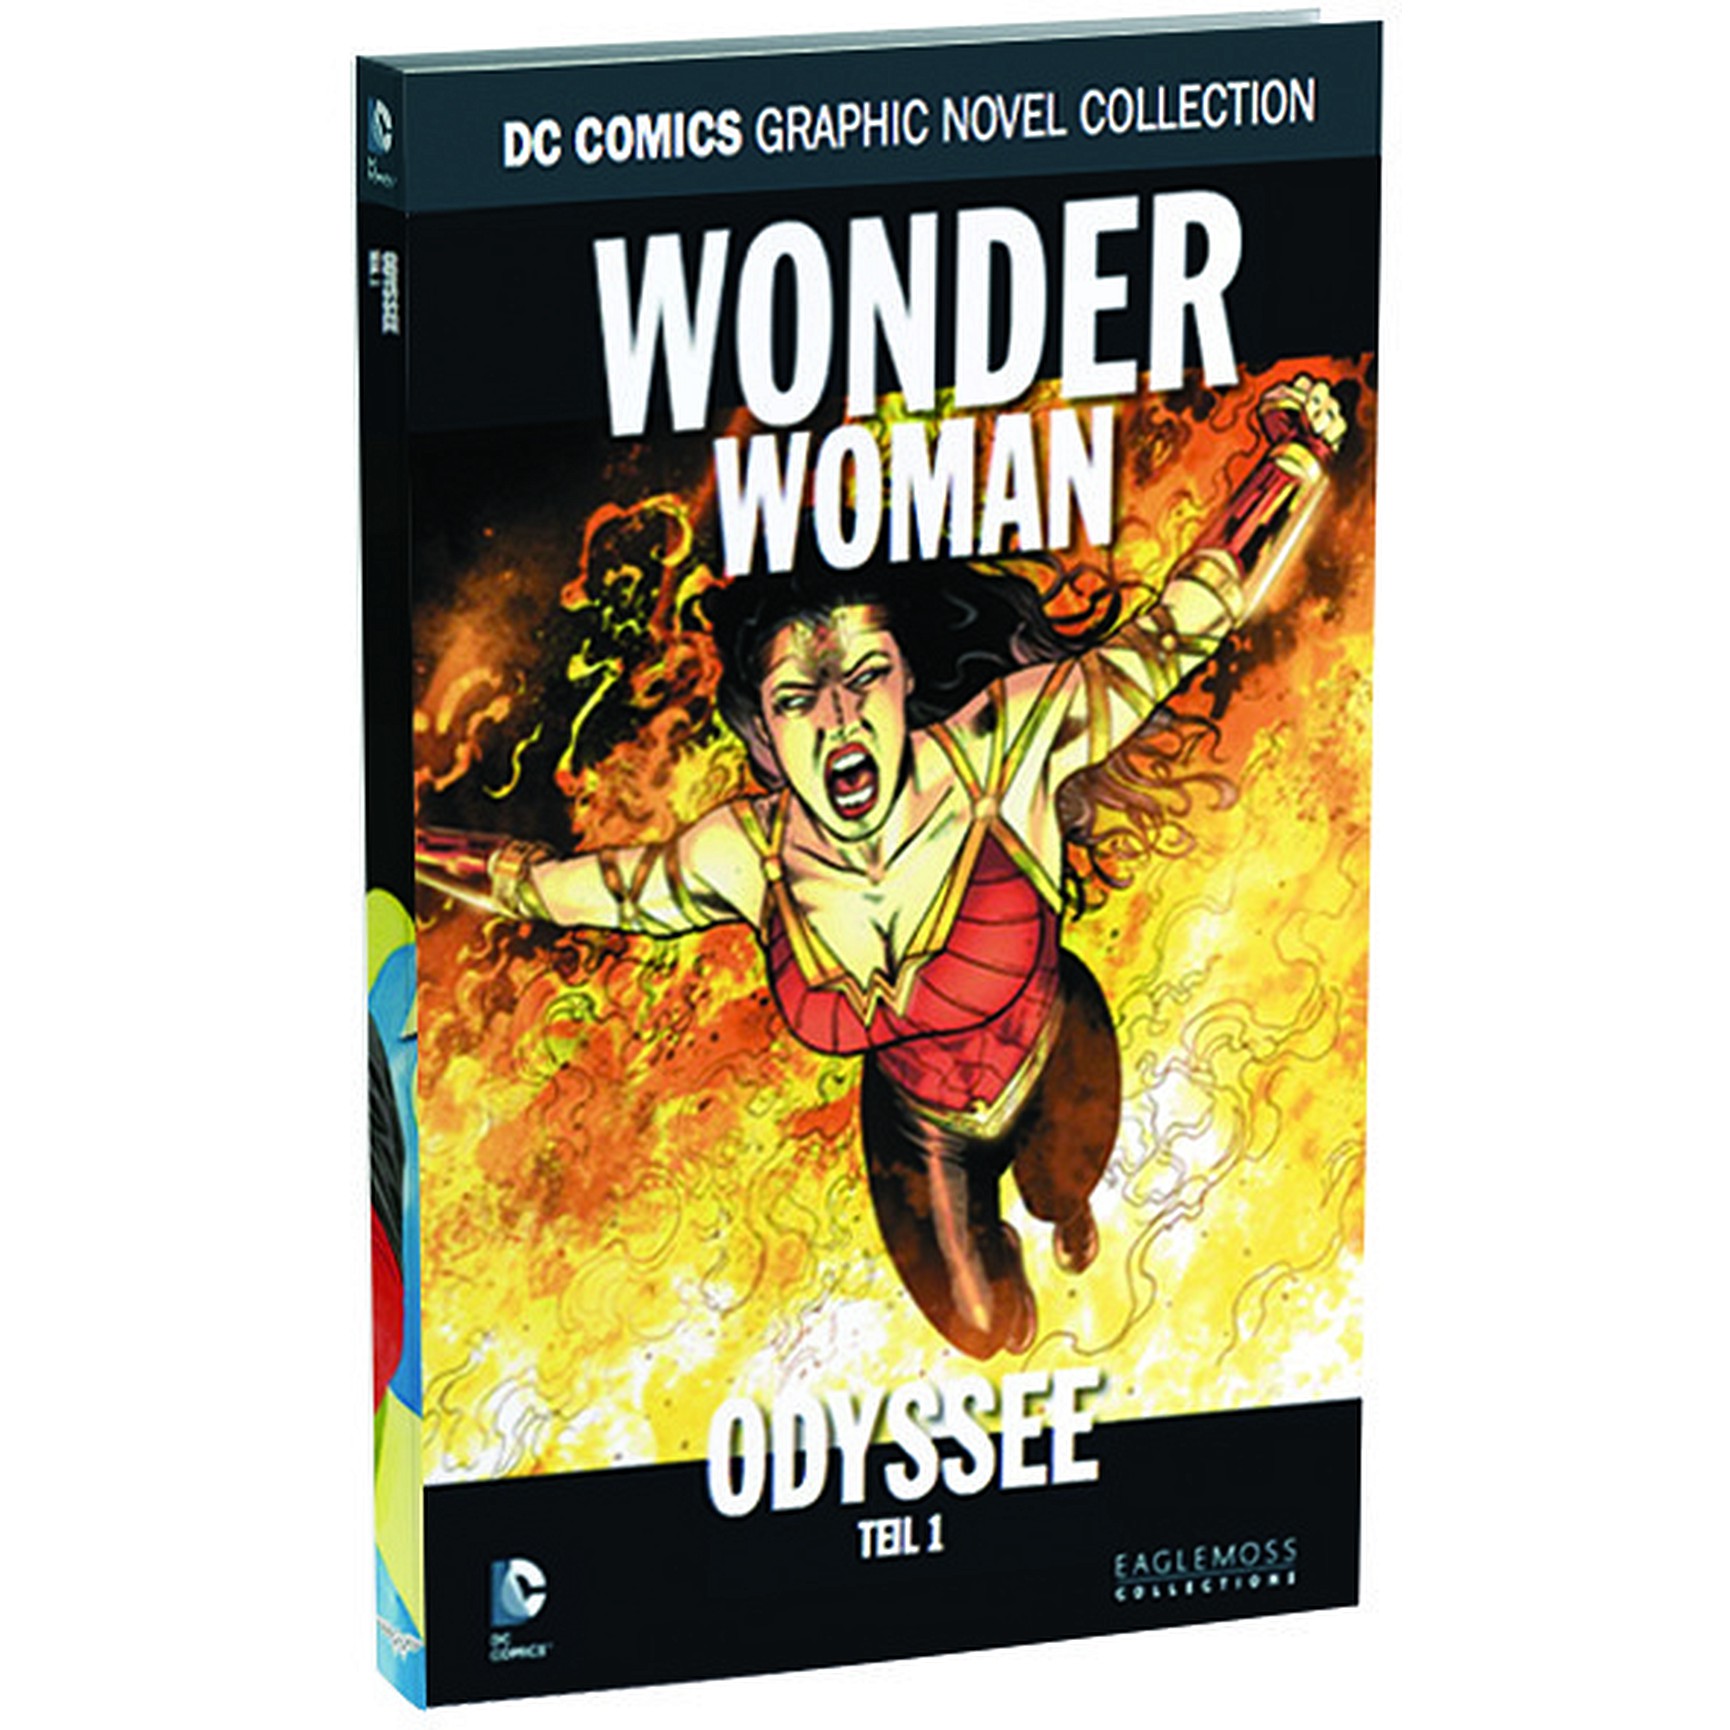 DC Comics Graphic Novel Collection Wonder Woman - Odysee Teil 1